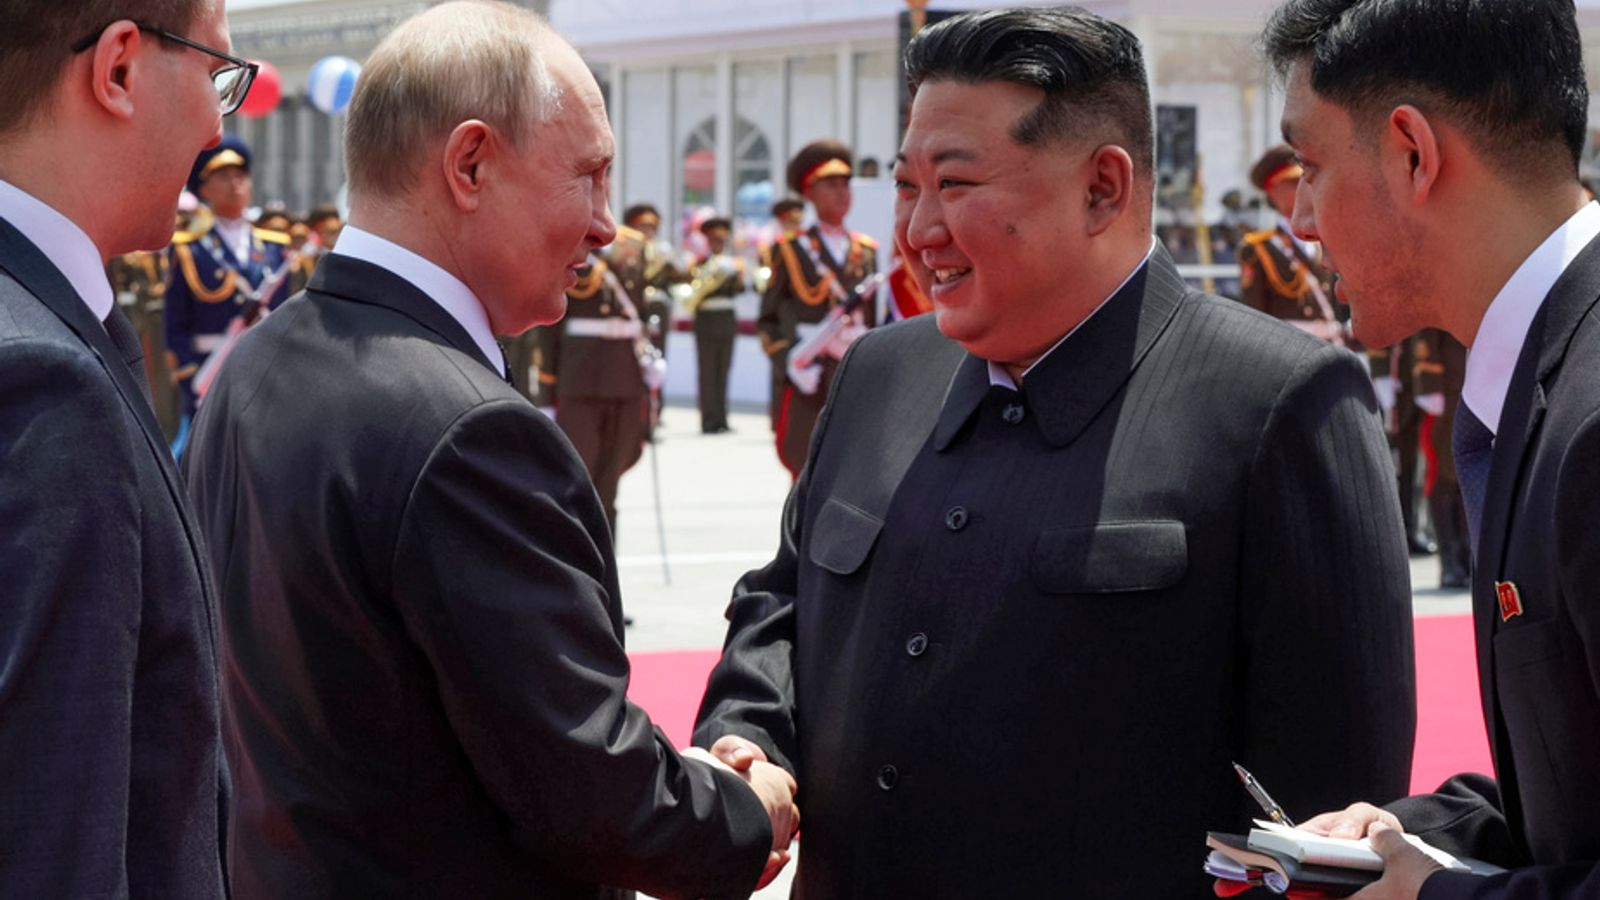 Putin's trip to North Korea underscores relationship - but China will be watching